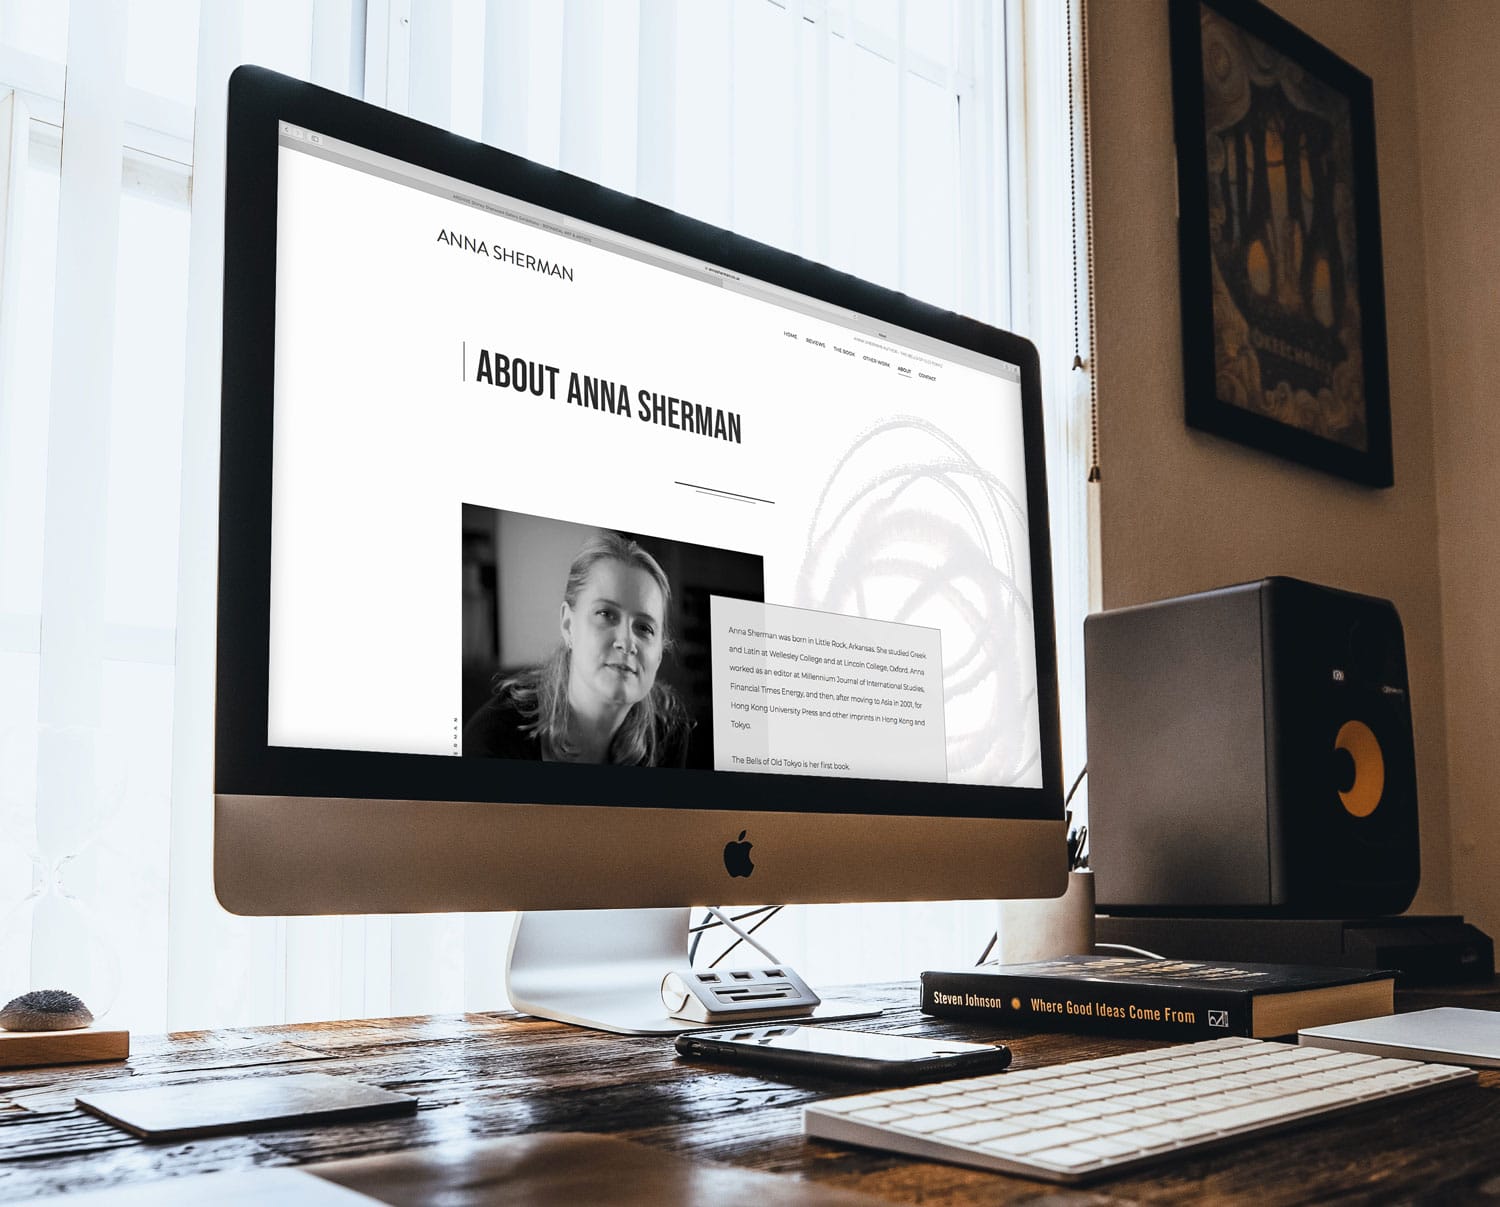 The Anna Sherman website displayed on an iMac